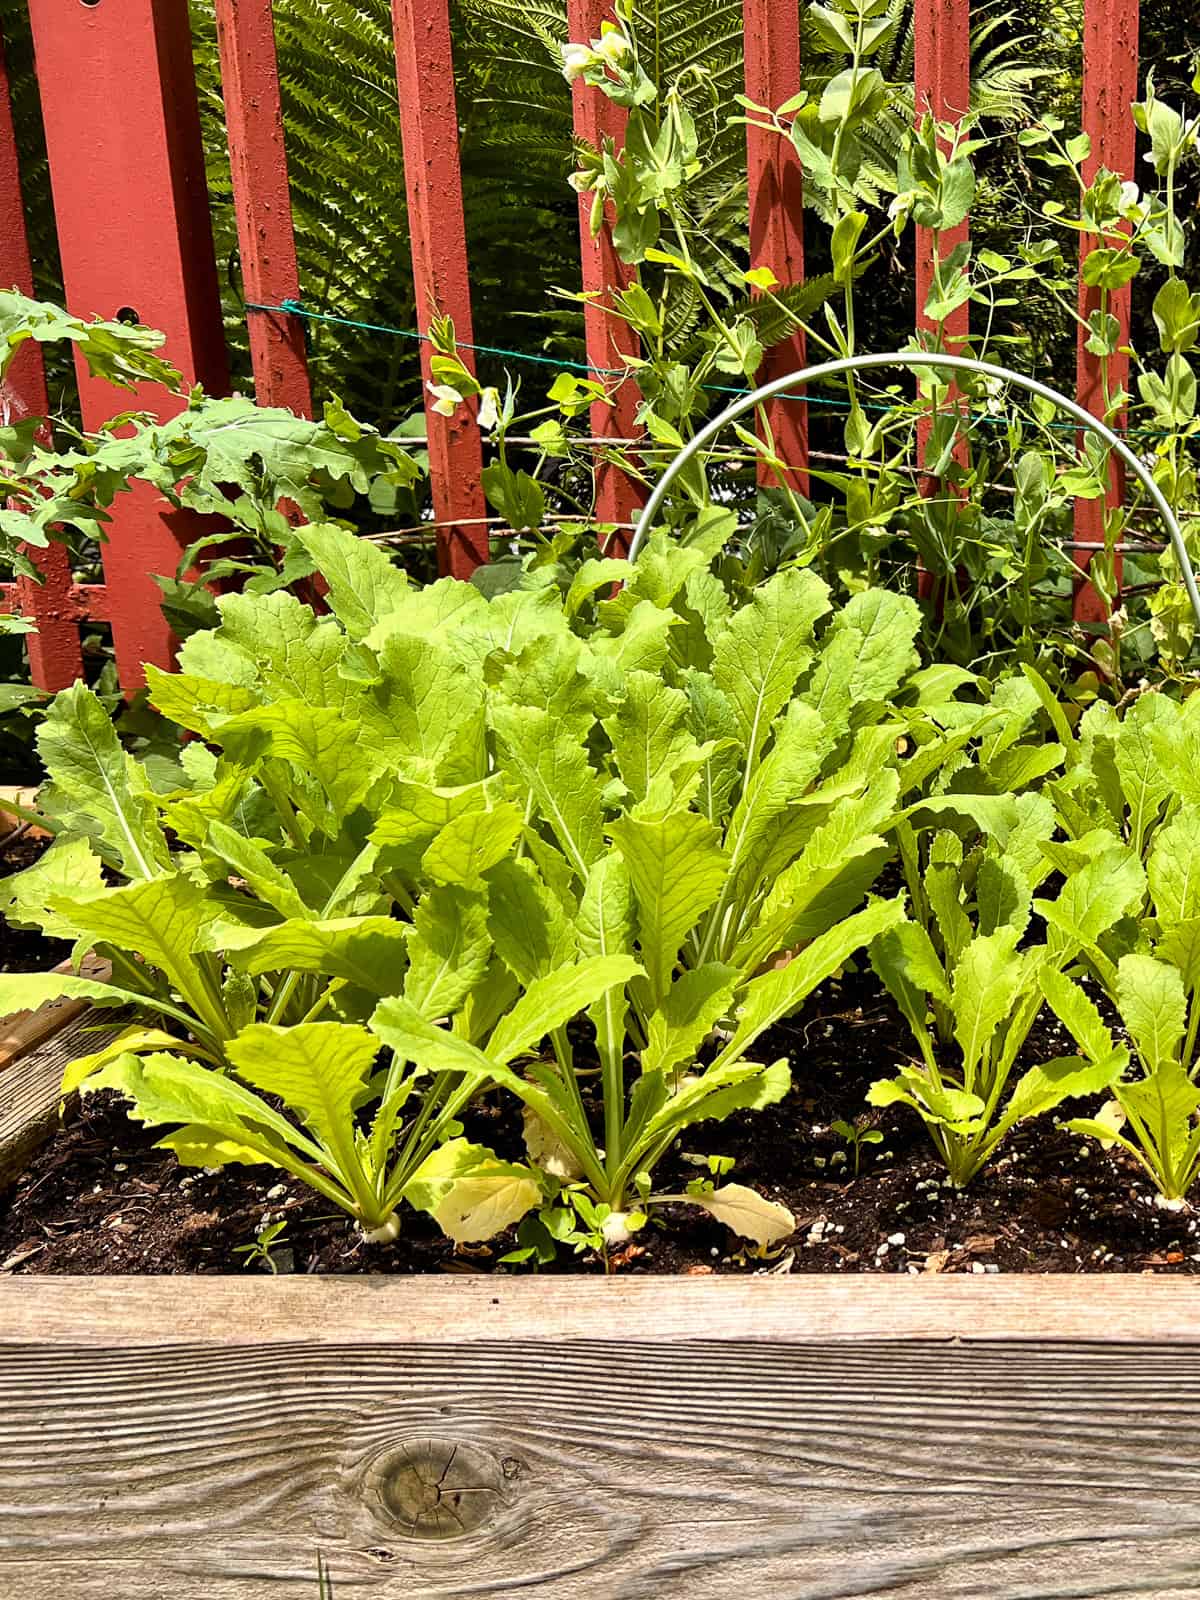 An image of turnips growing in a raised bed Square Foot Garden.